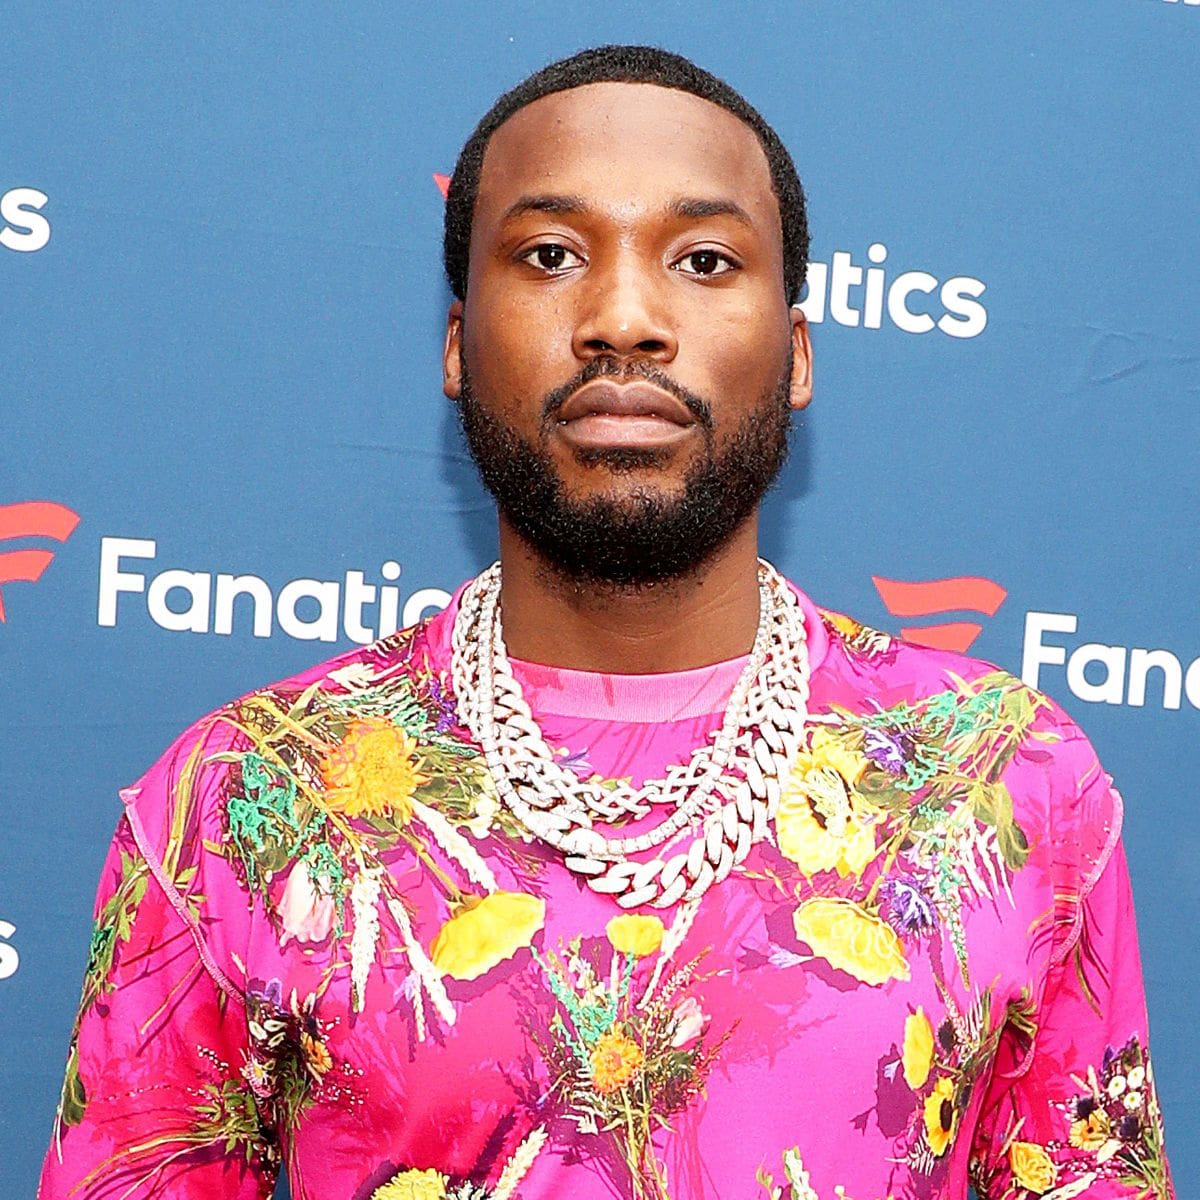 meek-mill-is-praised-by-fans-following-this-charitable-move